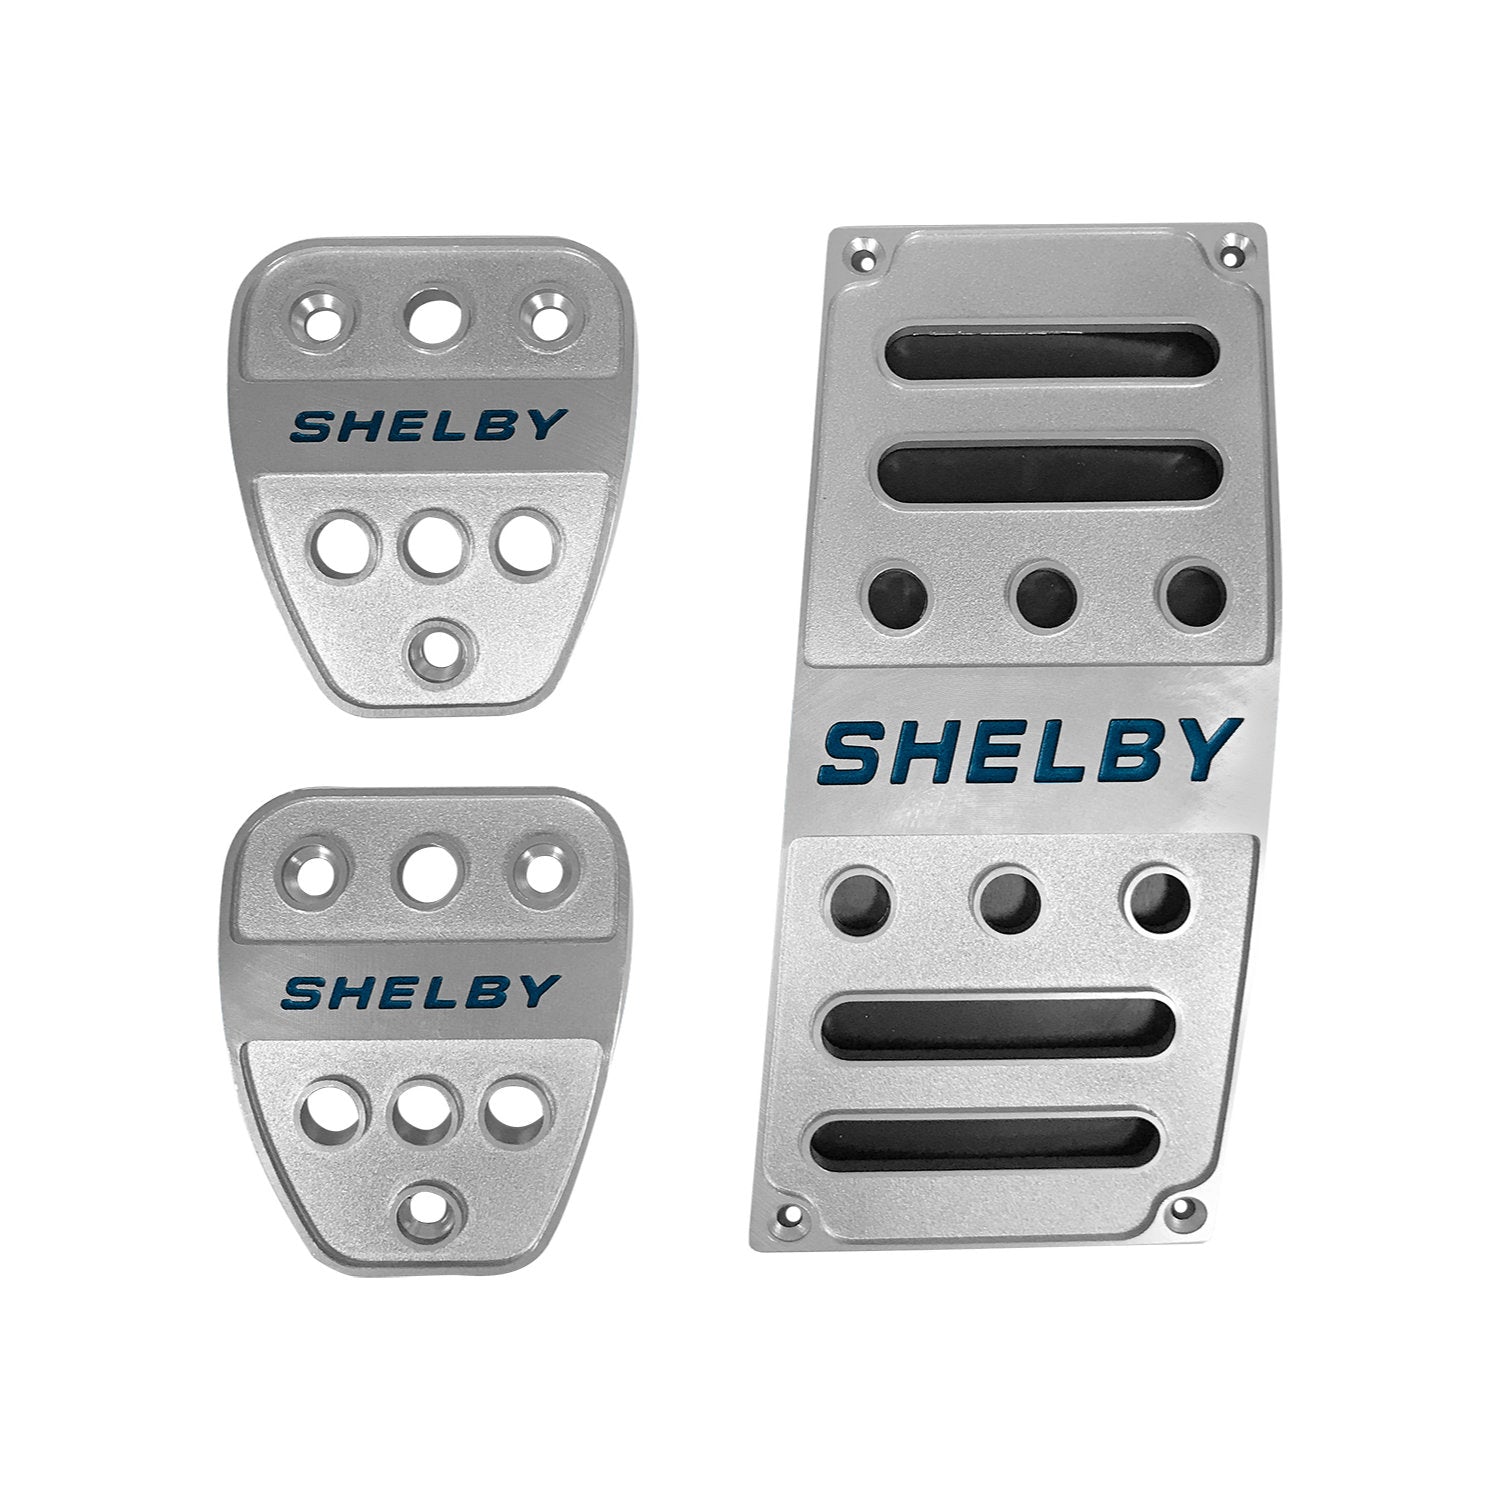 Shelby 2015-23 Billet Pedal Covers Set - Manual